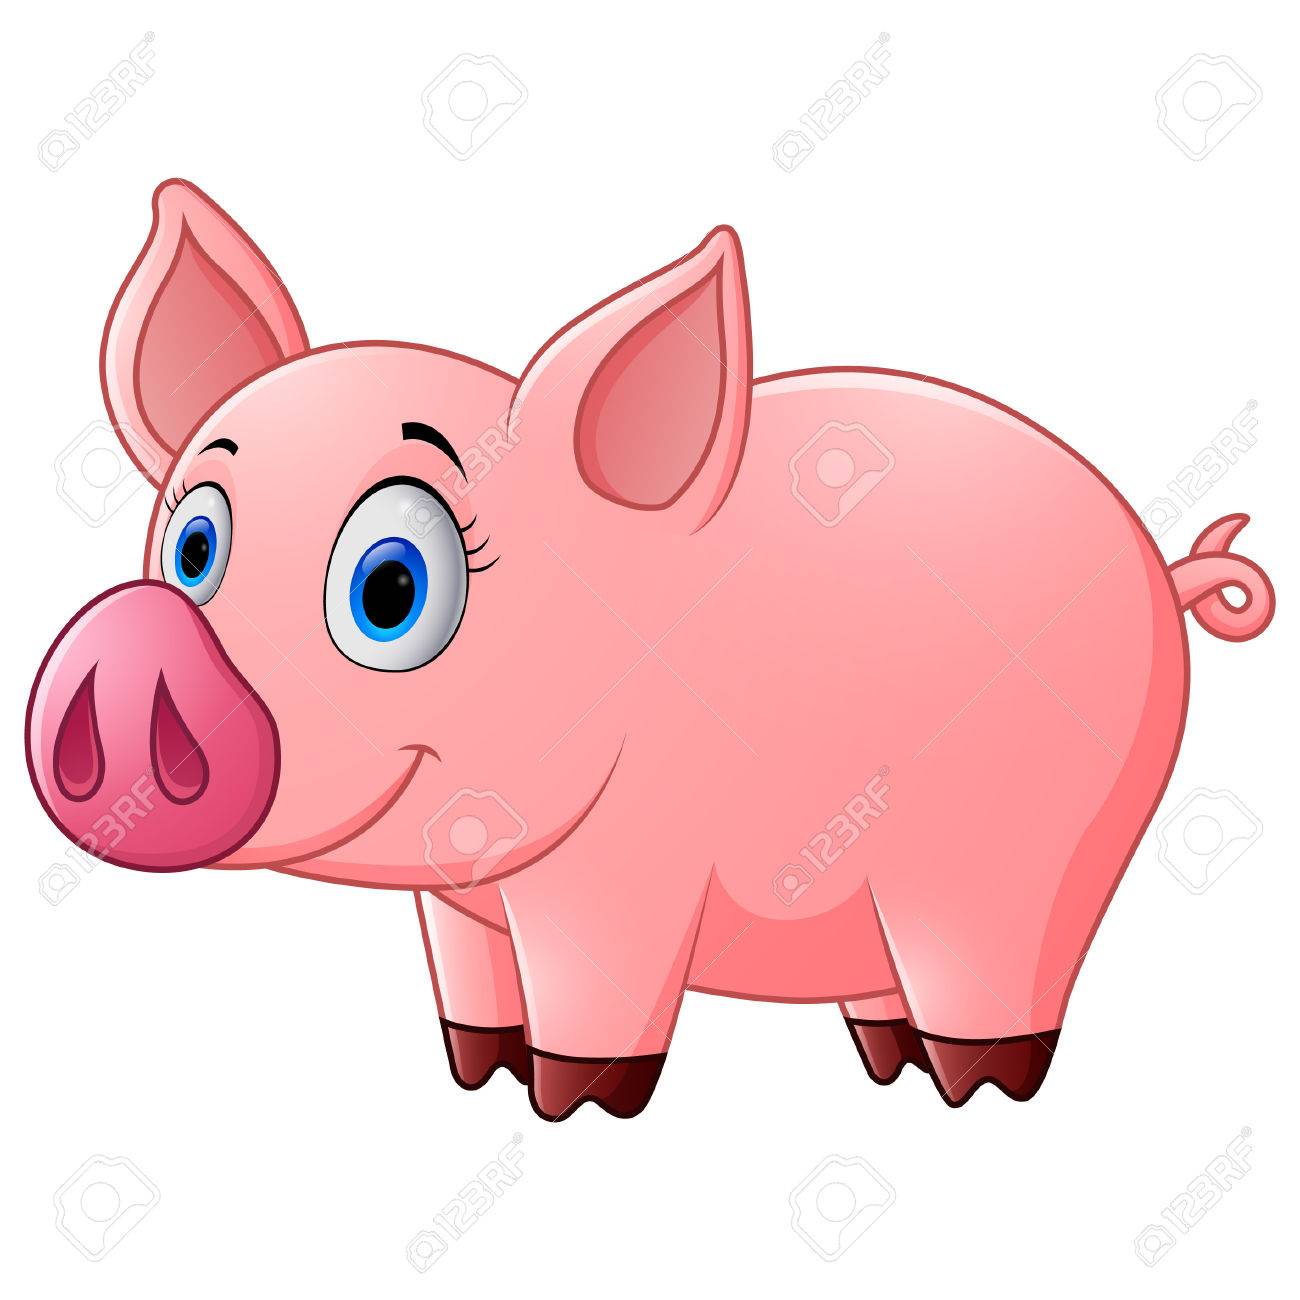 Pig Cartoon Images | Free download on ClipArtMag